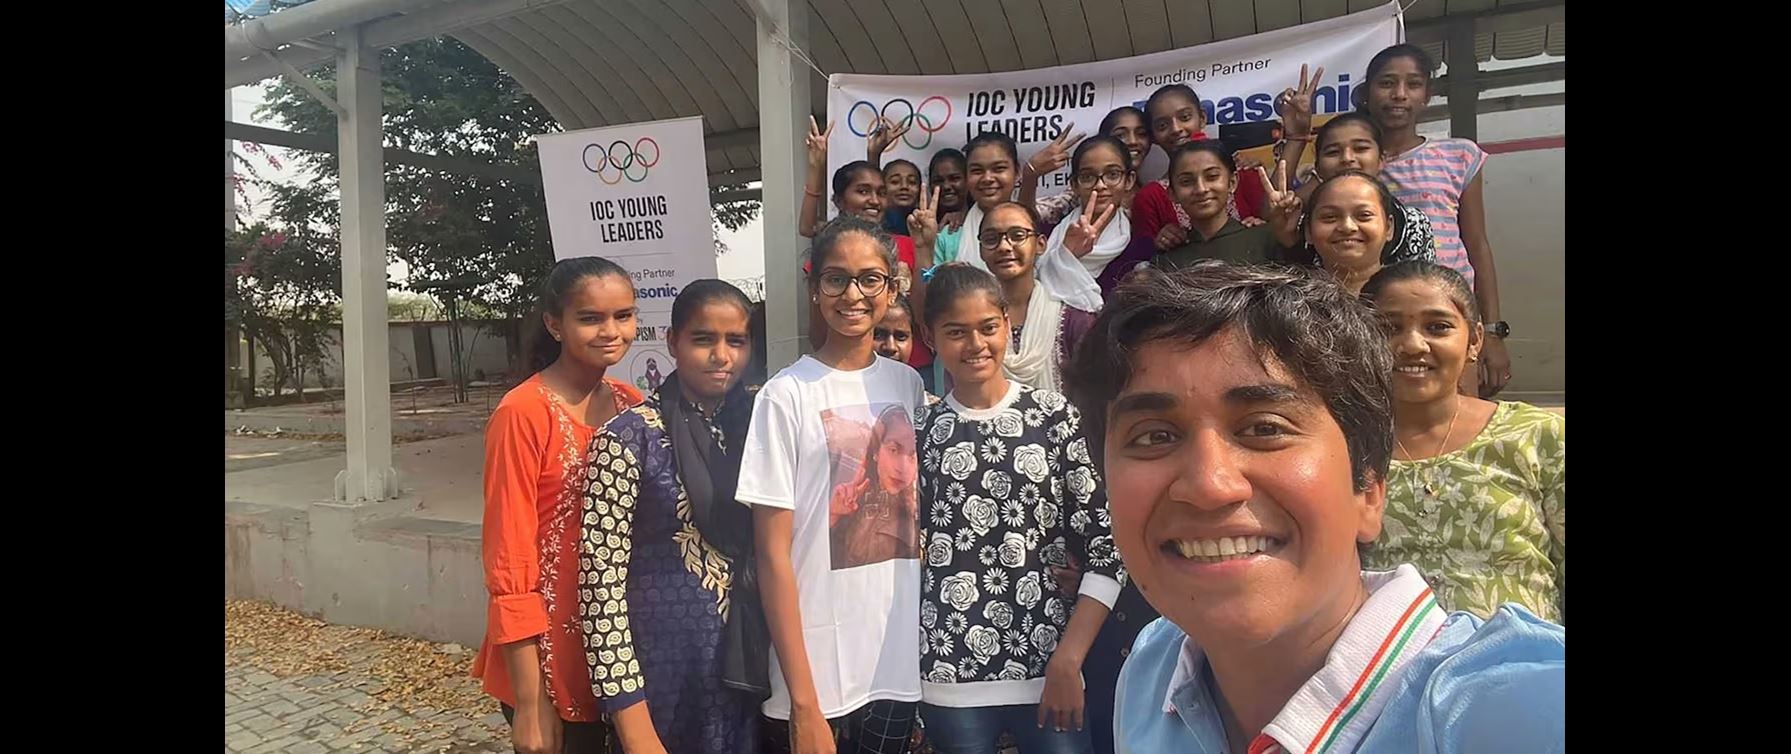 Using bicycles to change the lives of young girls in India the innovative project of IOC Young Leader Pragnya Mohan